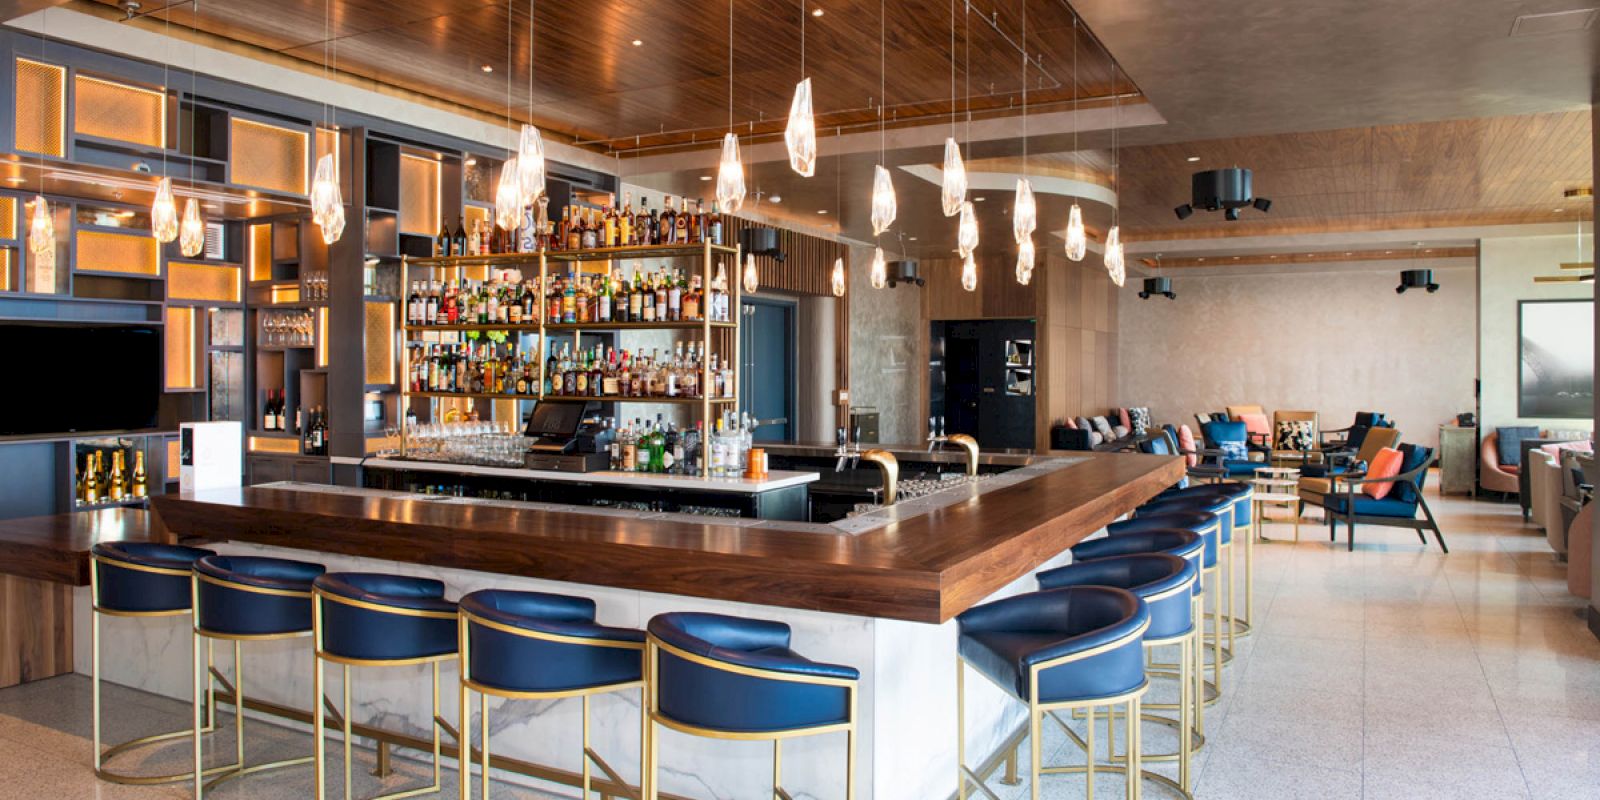 A stylish modern bar with a stocked liquor shelf, blue cushioned bar stools, overhead pendant lights, and a cozy seating area in the background.